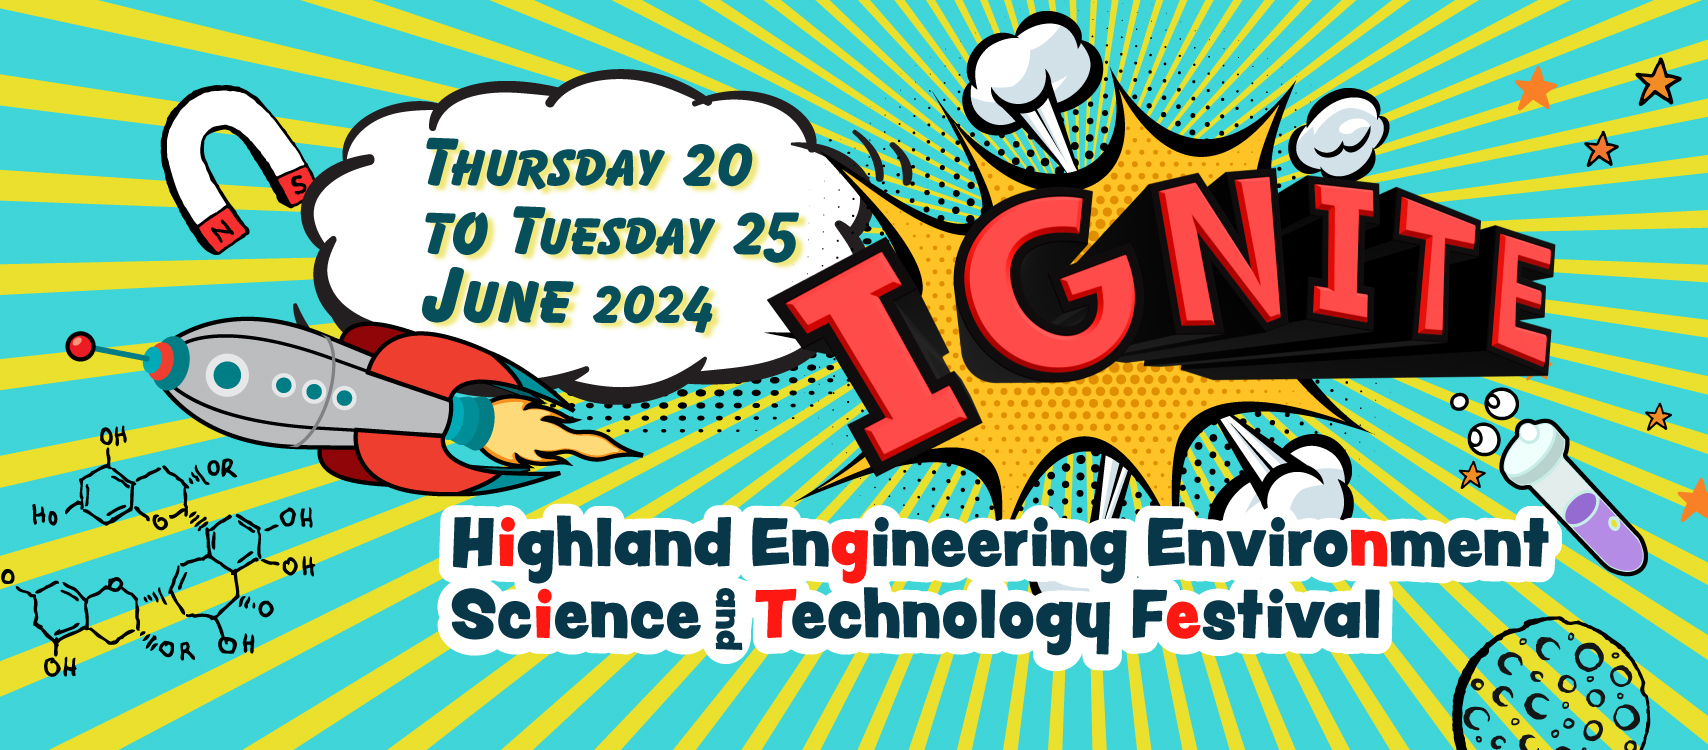 IGNITE | Highland Engineering Environment Science and Technology Festival | Thursday 20 to Tuesday 25 June 2024